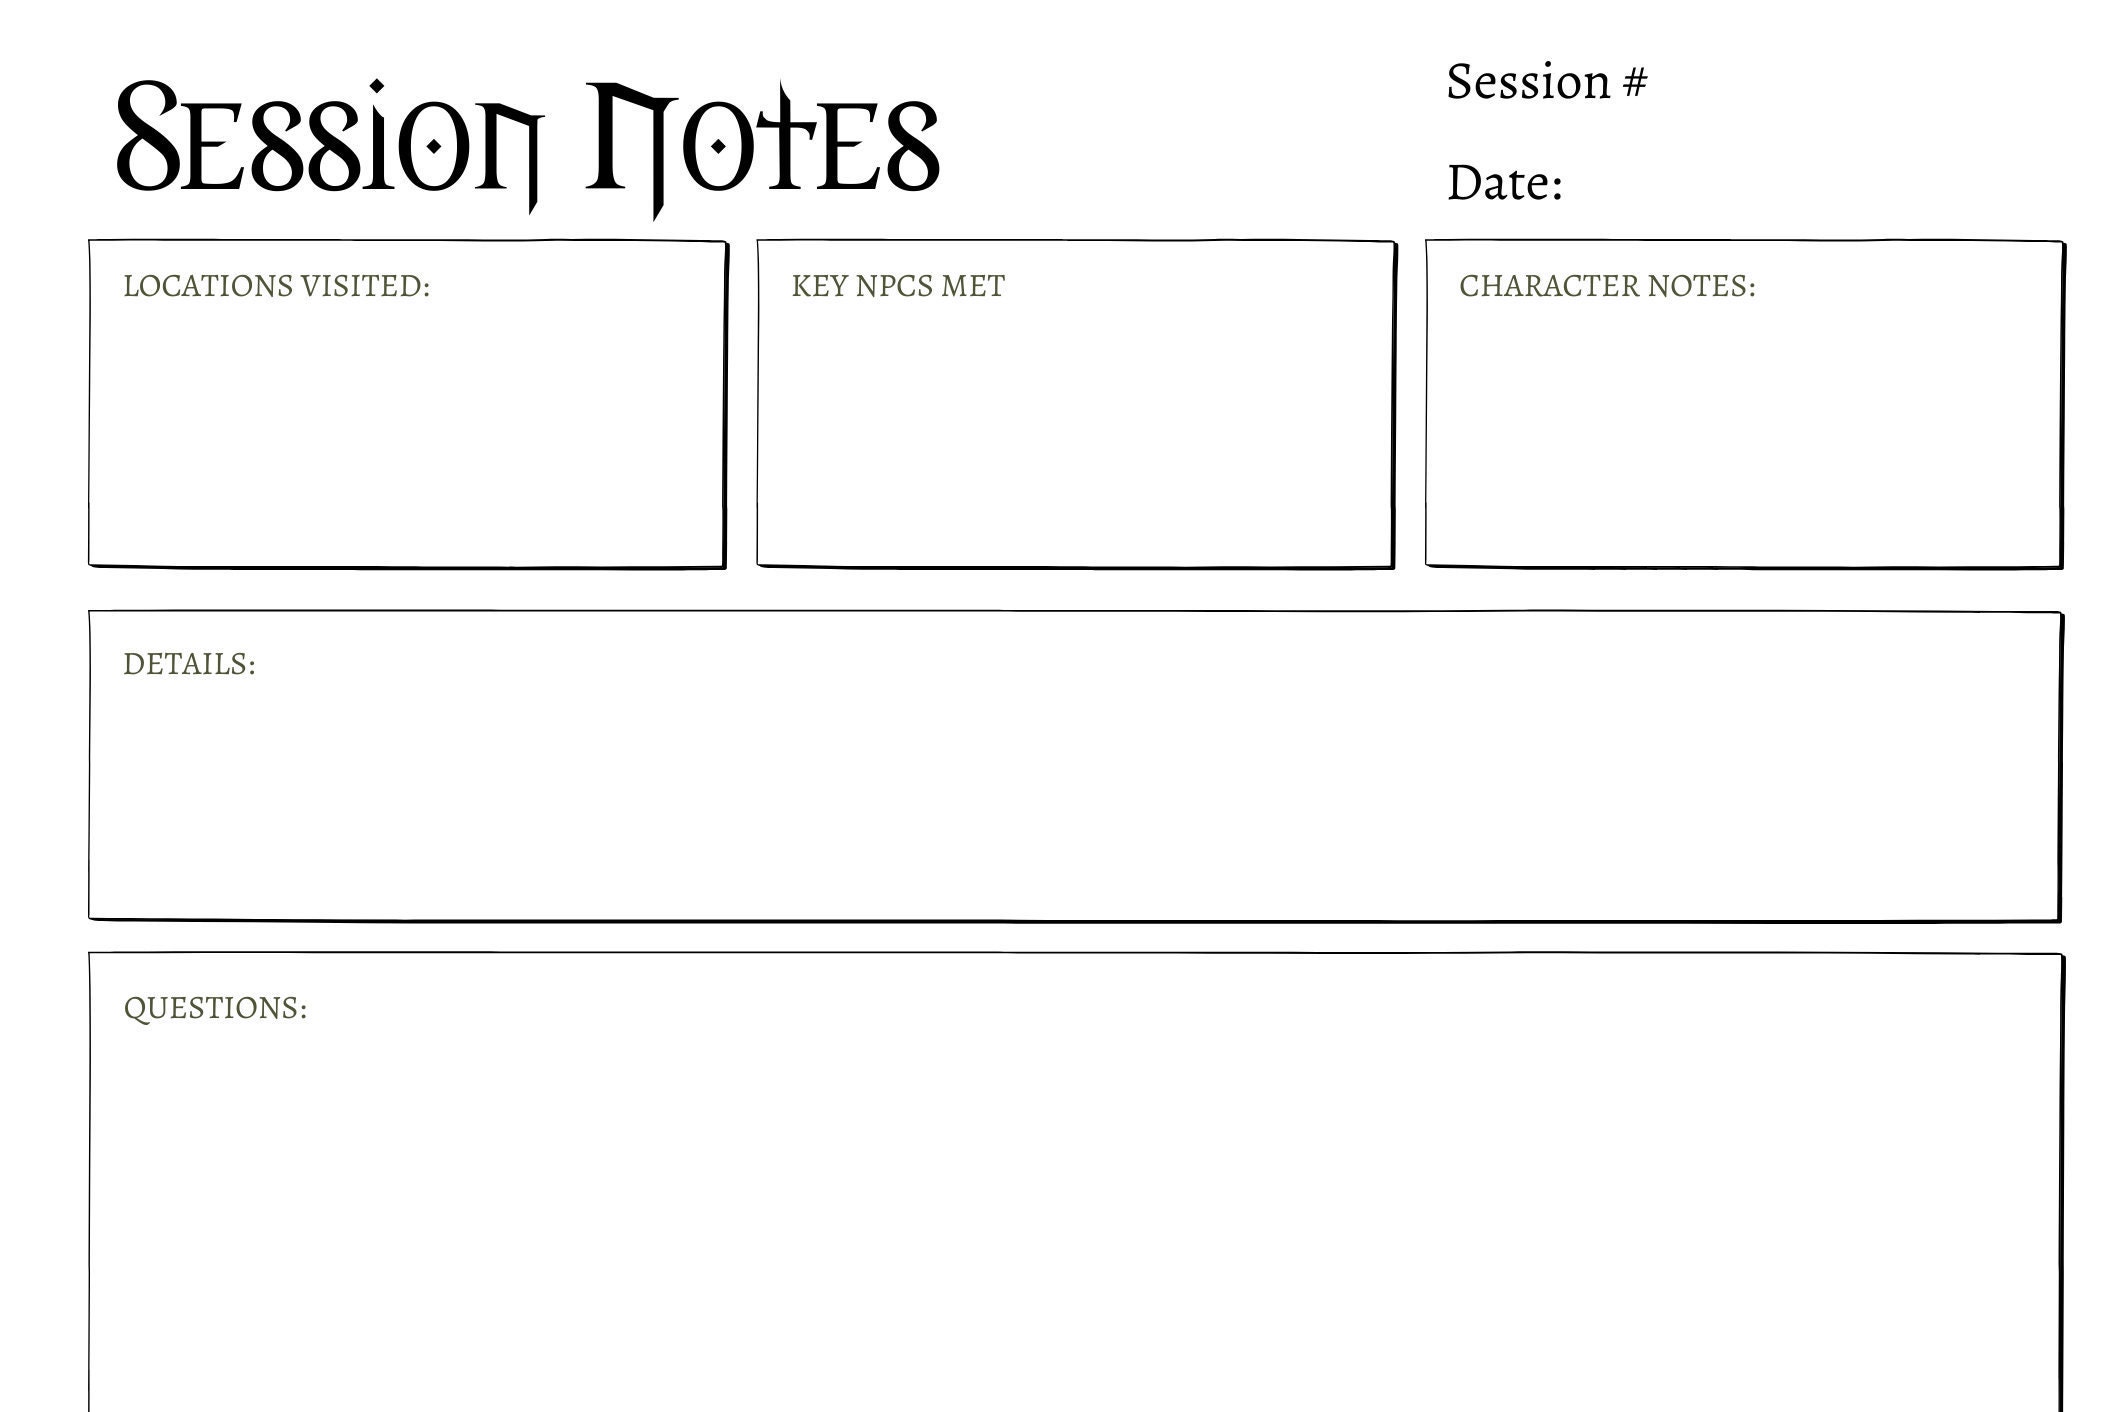 dnd-session-notes-perfect-for-session-summaries-etsy